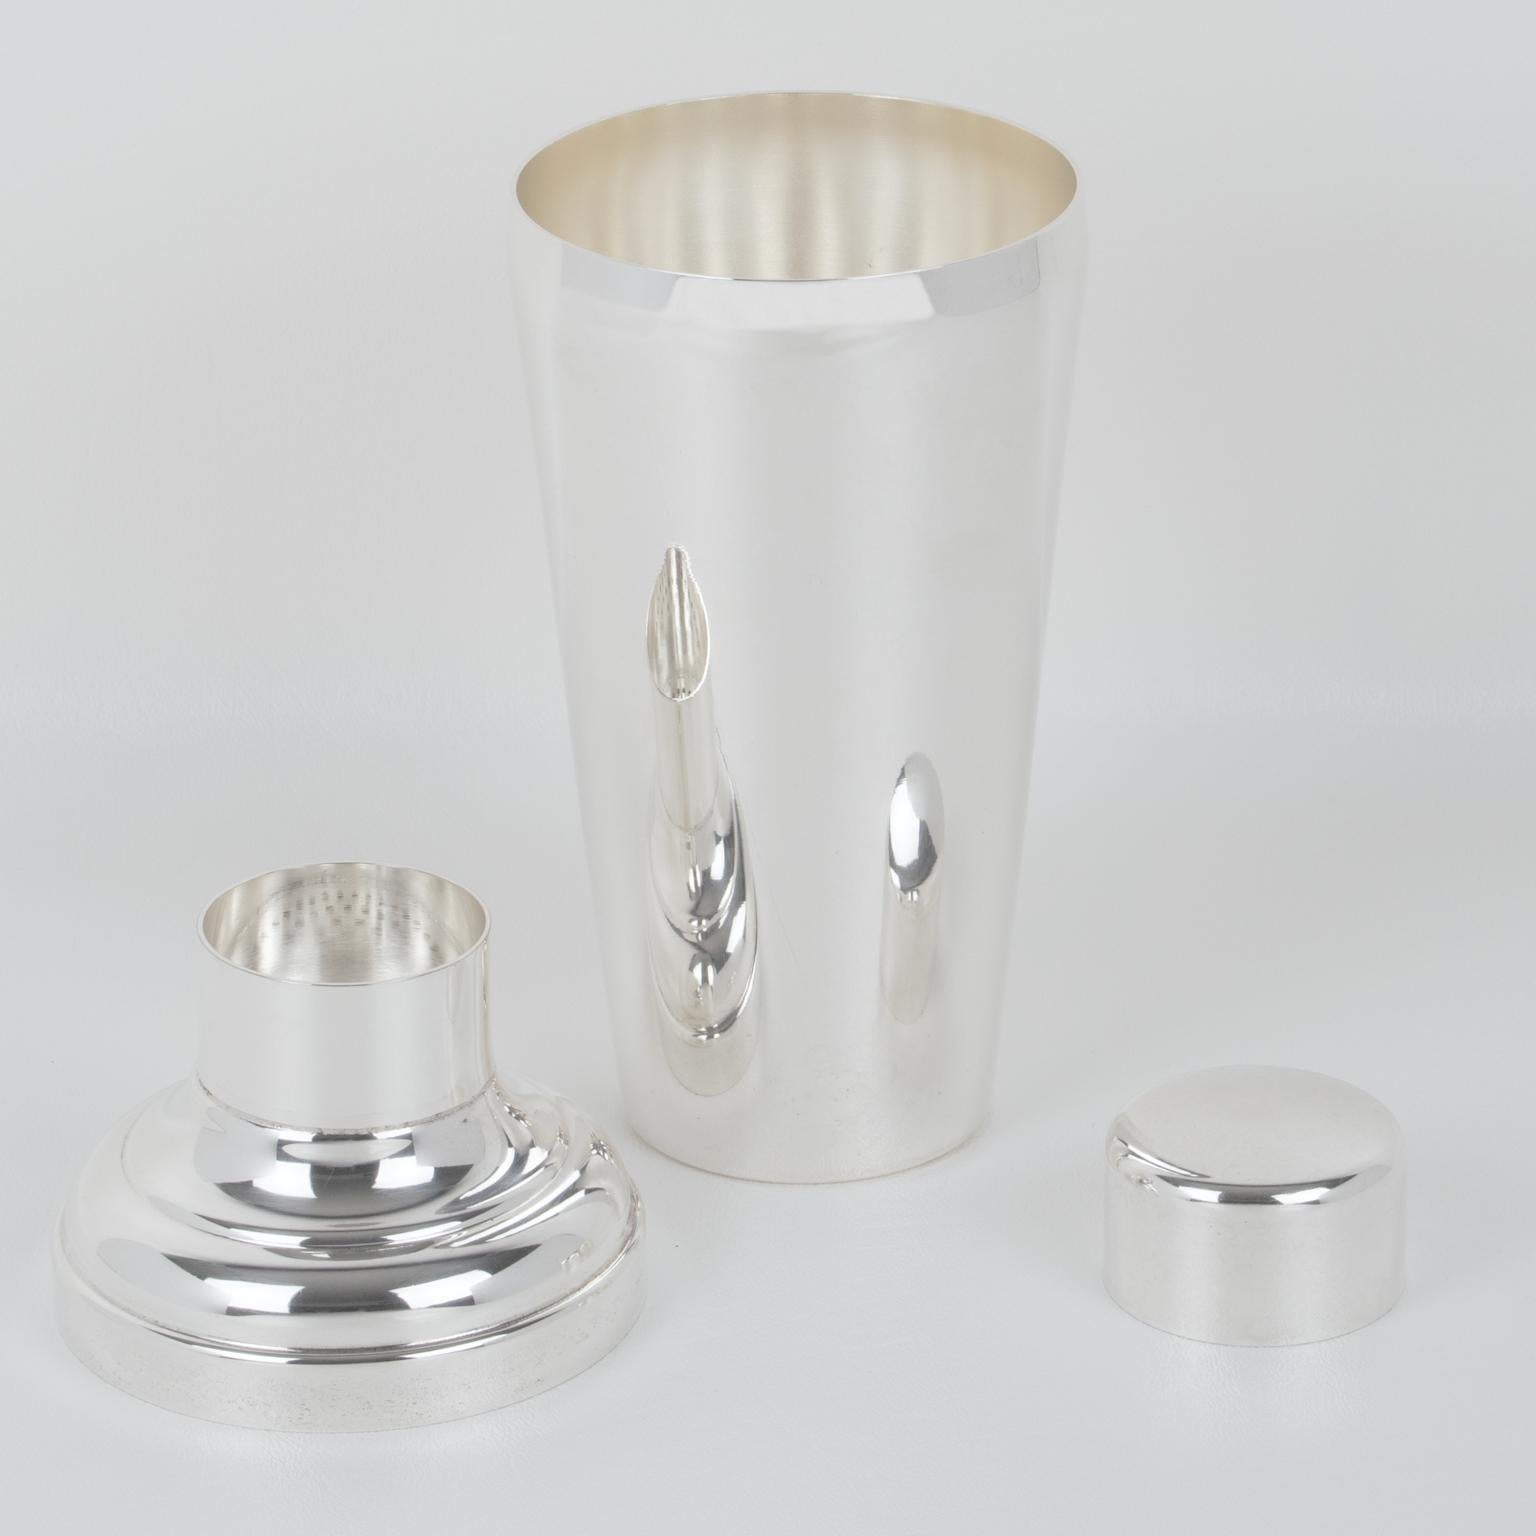 Silversmith Gelb, Paris, designed this sophisticated French Art Deco silver plate cylindrical cocktail or Martini shaker. The three-sectioned cocktail shaker has a removable cap and strainer filter. The piece boasts a lovely geometric shape with a